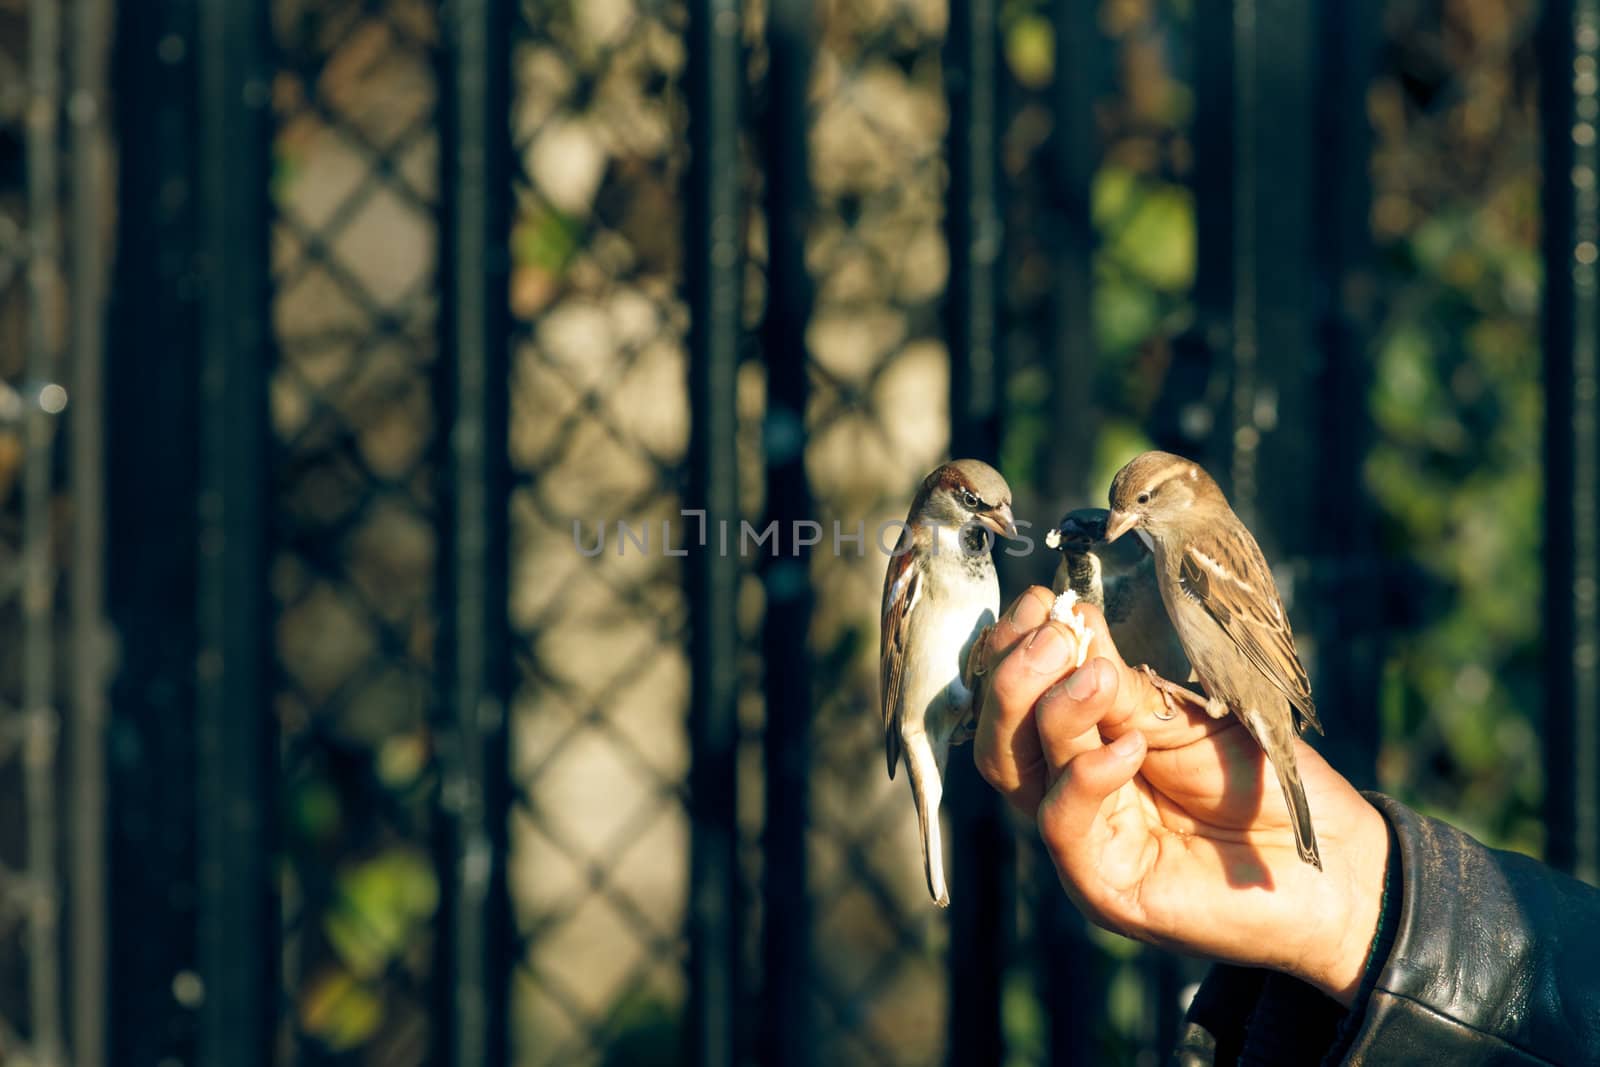 Sparrows standing on a human hand and eating by Lamarinx